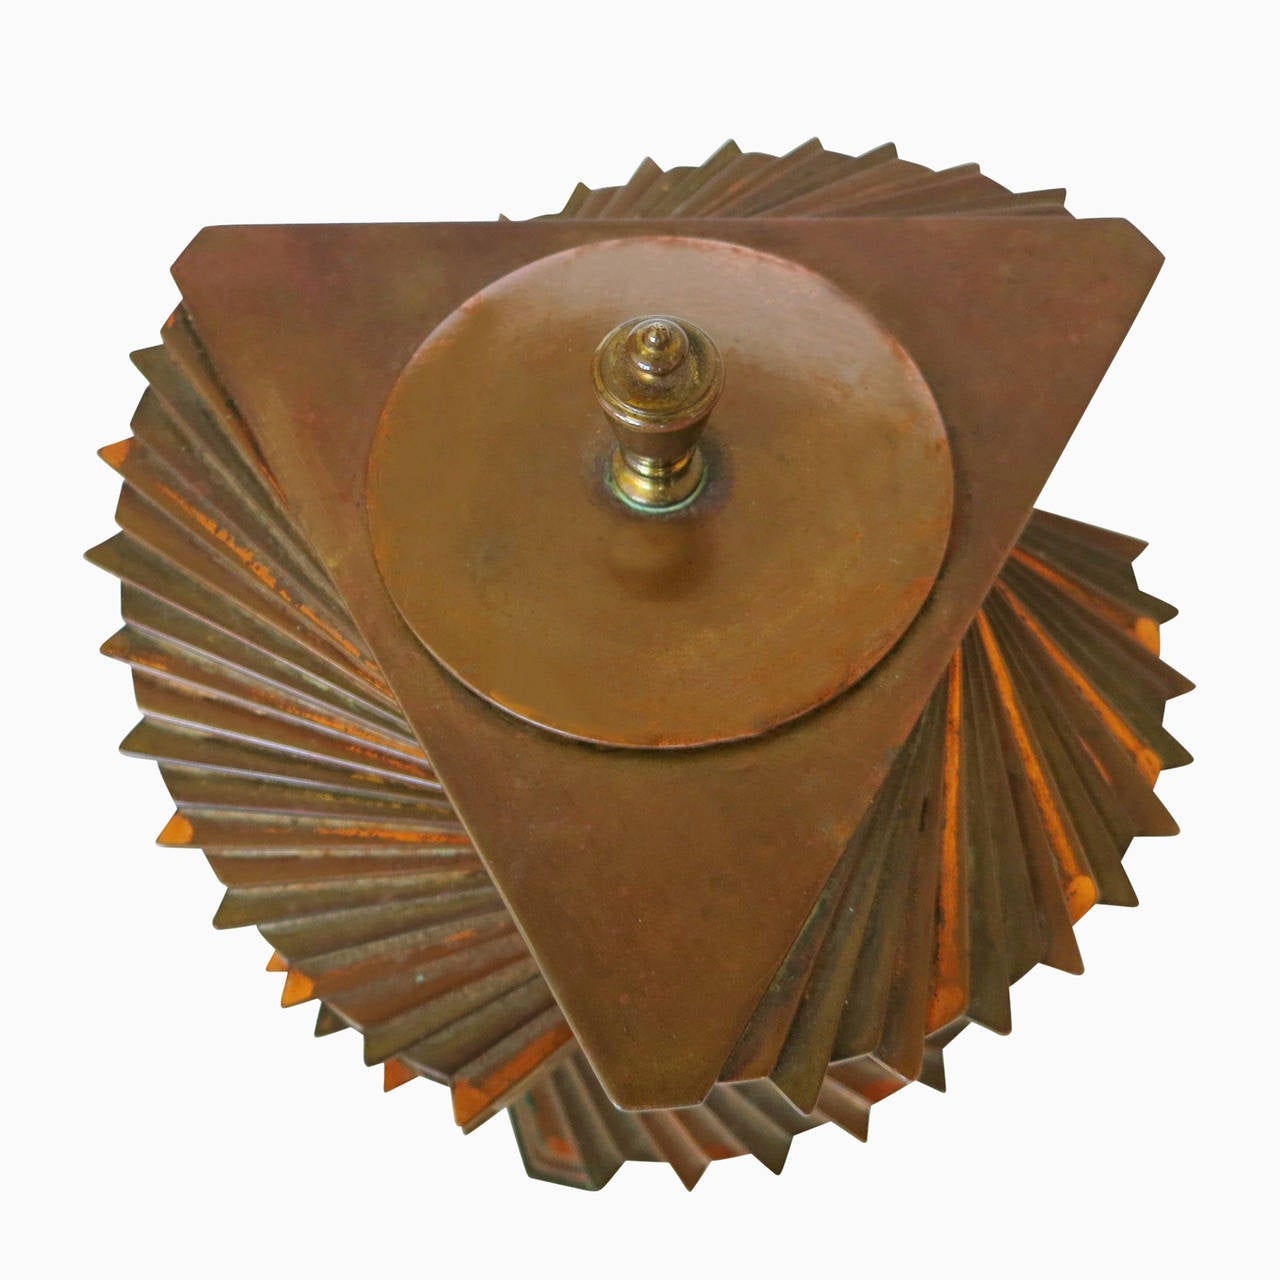 This rare Art Deco brass and copper lidded box (originally designed for cigarettes) was designed, patented and produced by John Otar circa 1928. The box is composed of individual triangular plates stacked to create a spectacular twisting spiral form